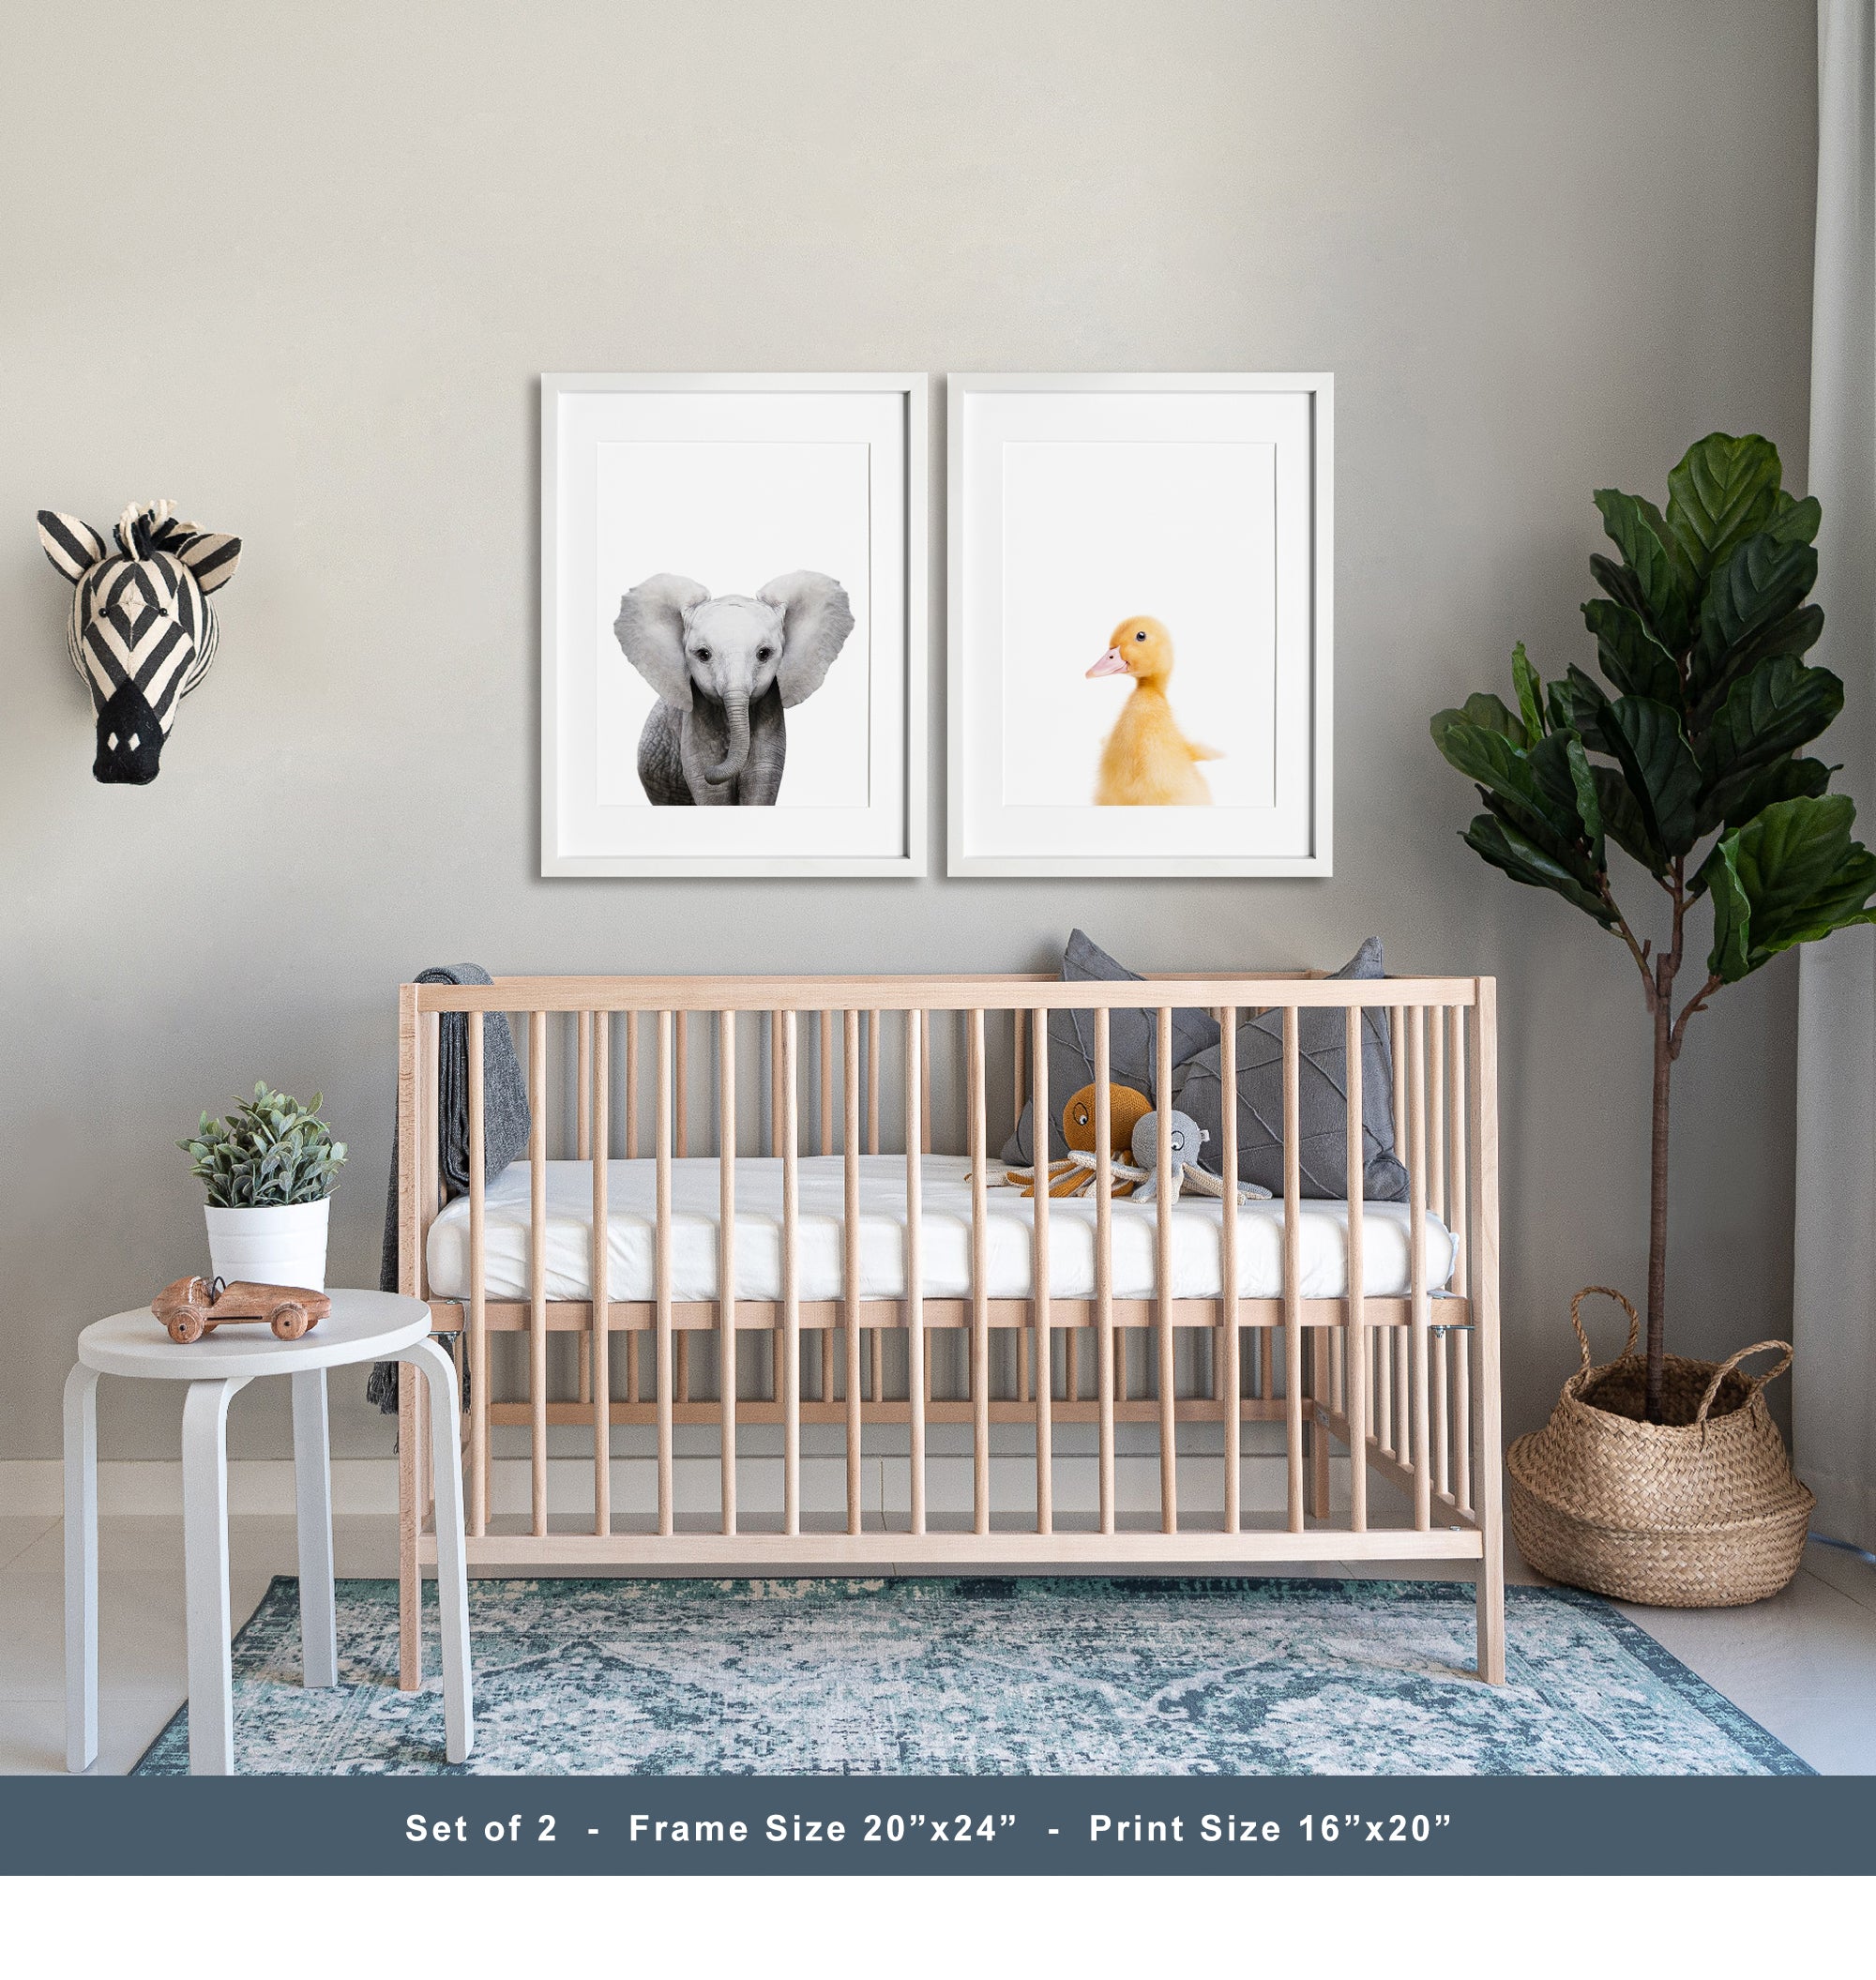 how to frame baby animal prints